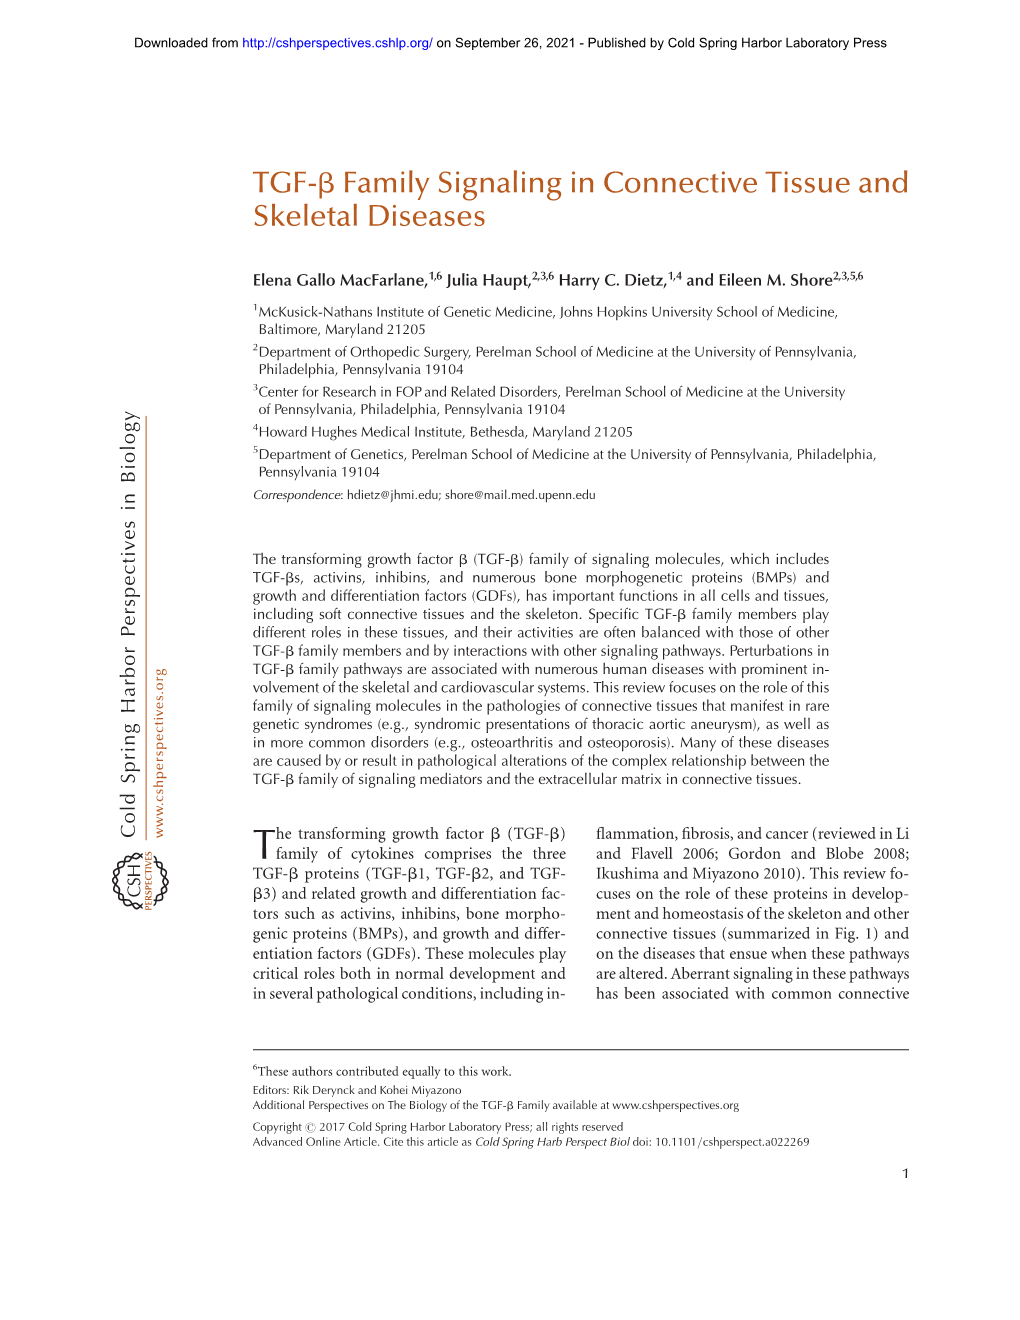 TGF-Β Family Signaling in Connective Tissue and Skeletal Diseases